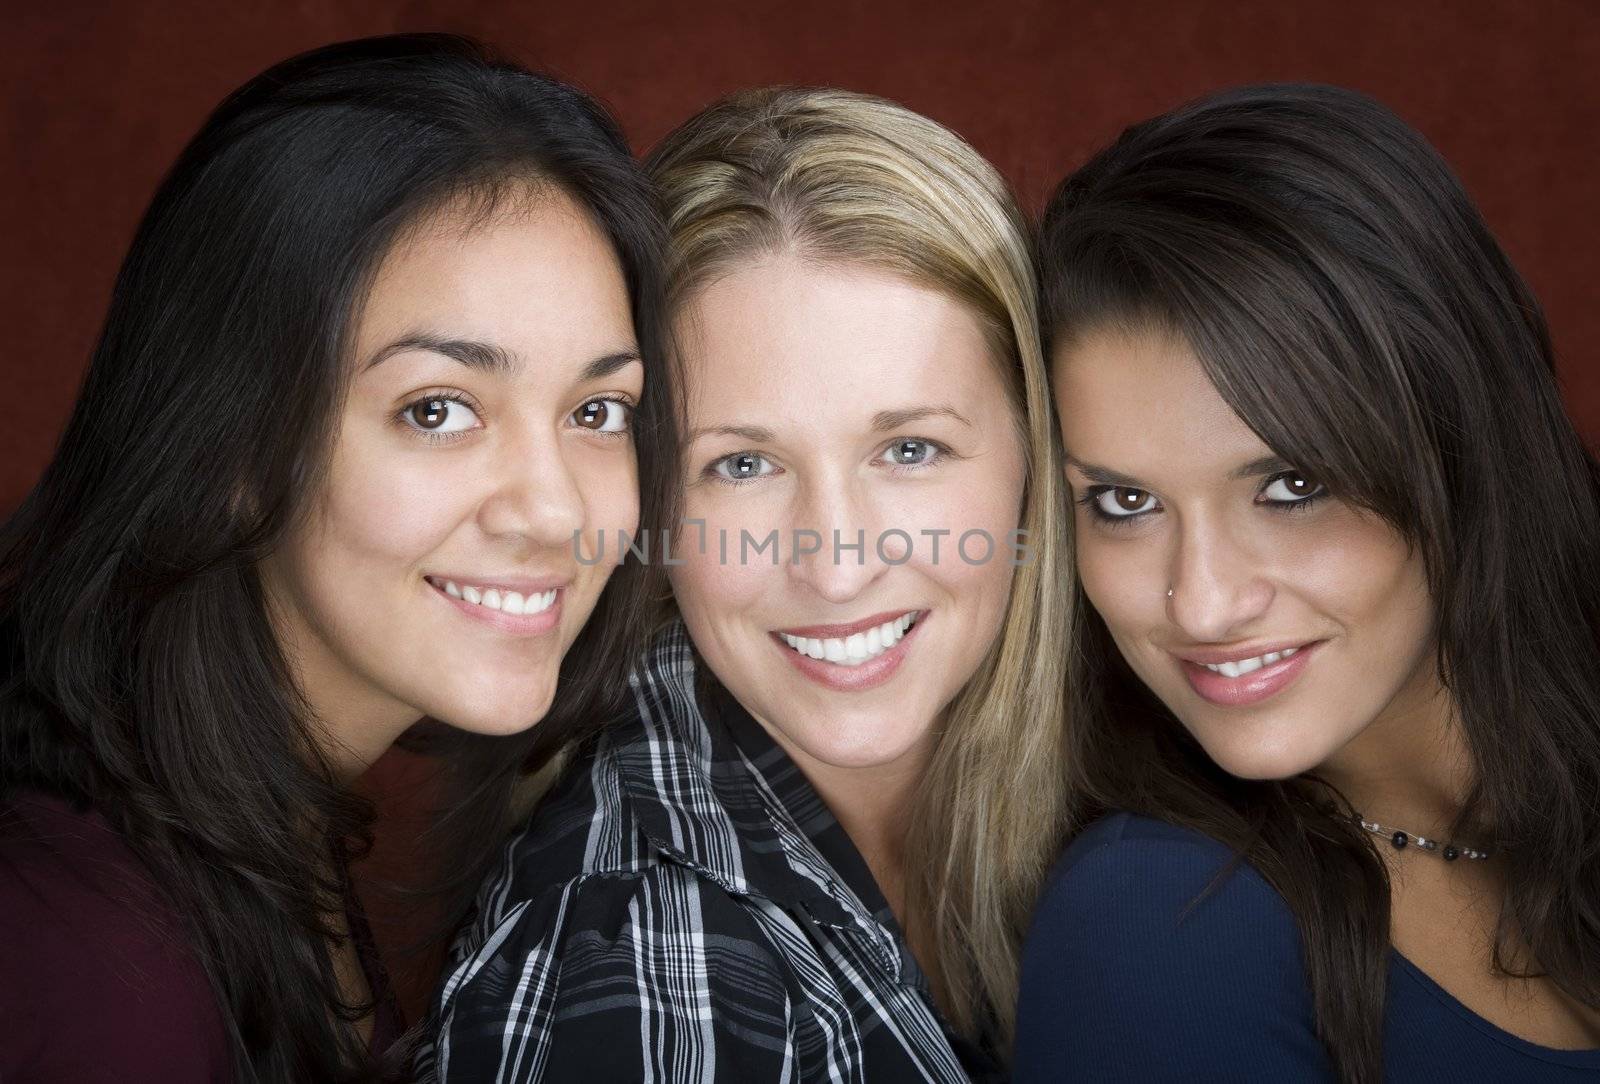 Three smiling young women in a studio setting